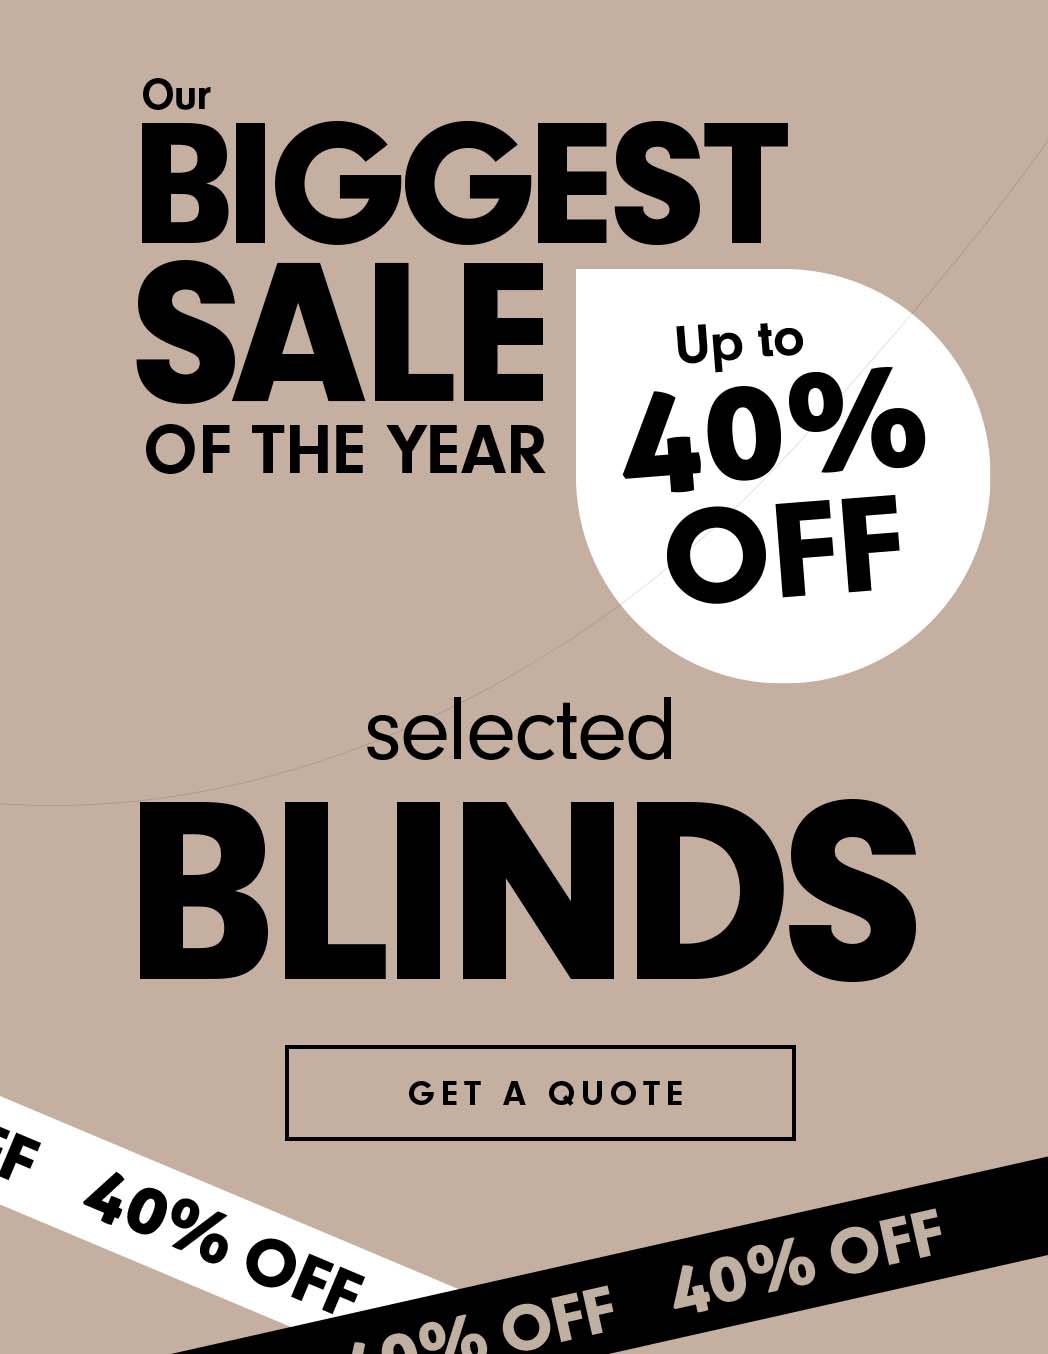 Our Biggest Sale on Blinds in Melbourne & Canberra Location